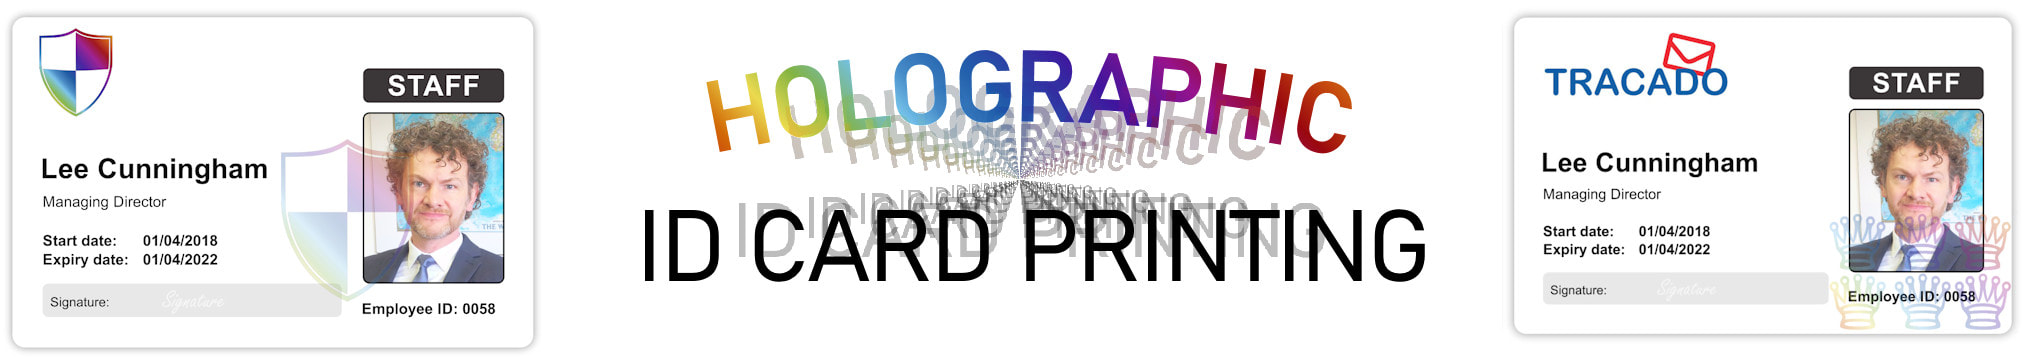 Aberdeen holographic ID card print service. Employee Identity cards with hologram or holograph security mark.